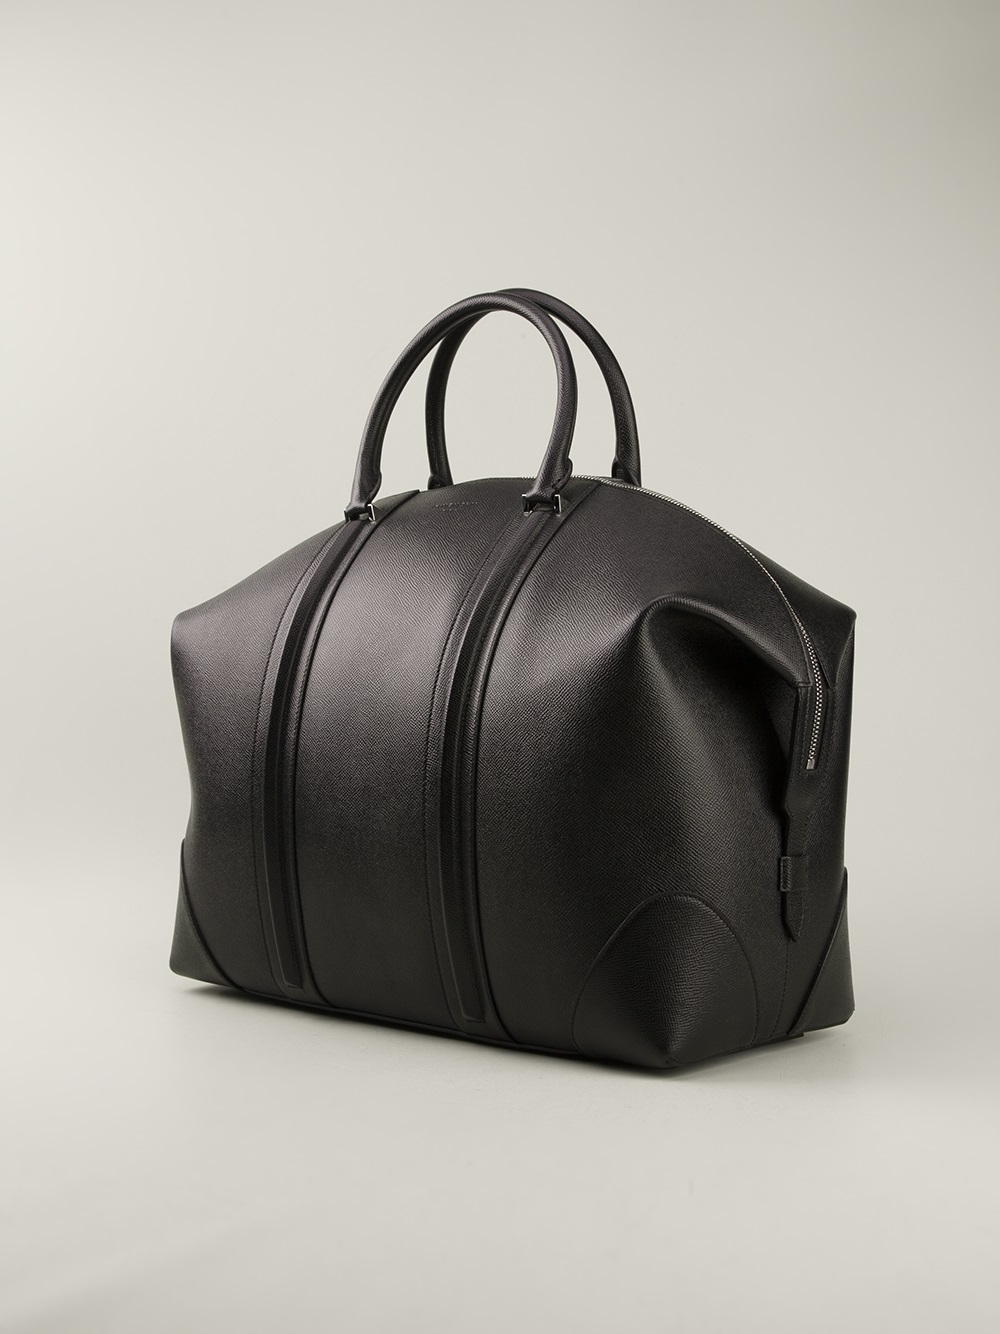 Lyst - Givenchy Luggage Bag in Black for Men